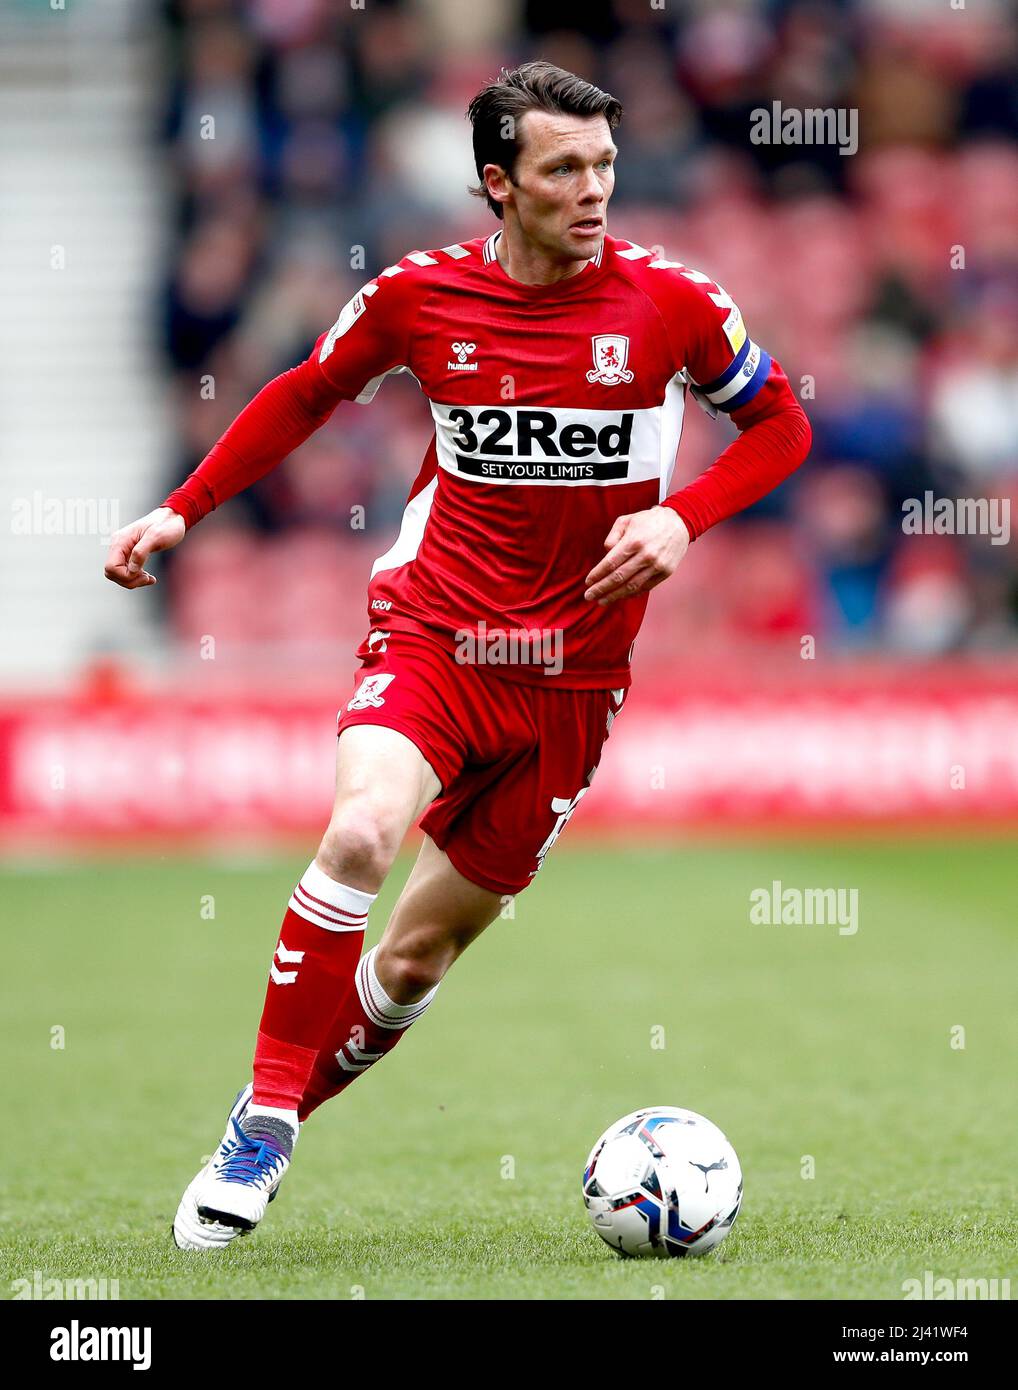 Middlesbrough's Jonny Howson in action during the Sky Bet Championship match at the Riverside Stadium, Middlesbrough. Picture date: Saturday April 9, 2022. Stock Photo